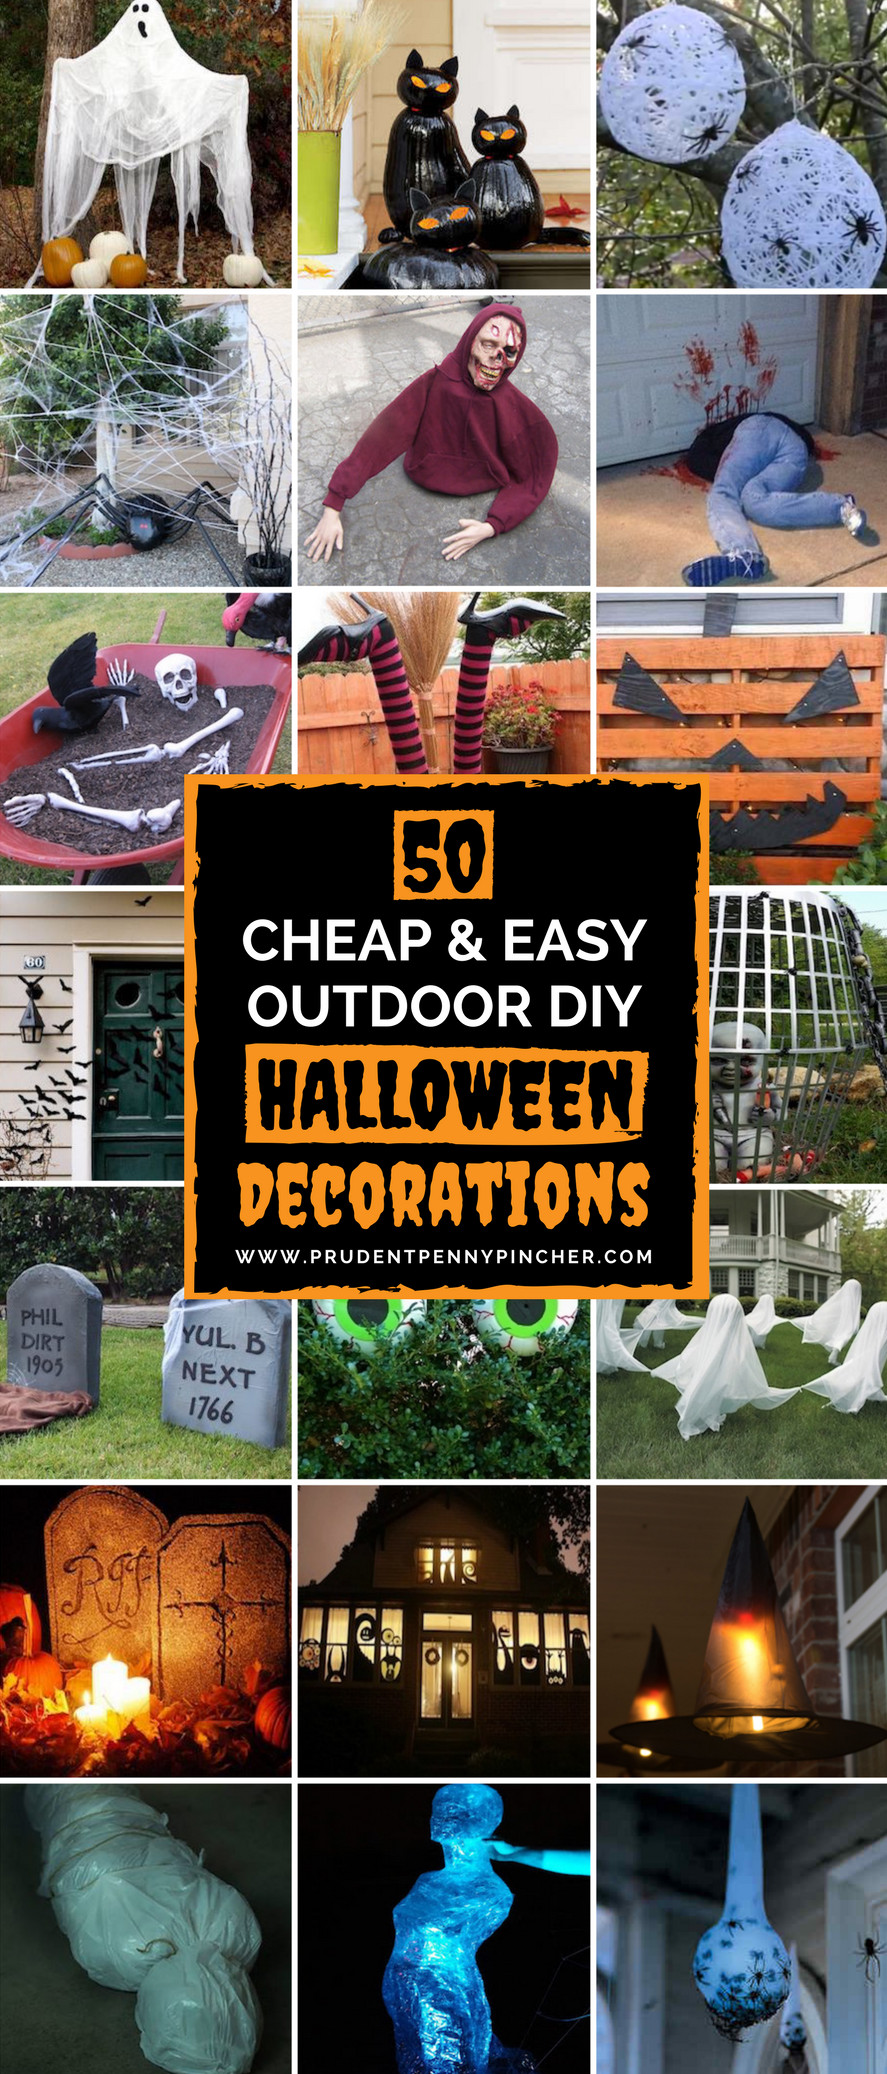 DIY Halloween Decorations Outdoor
 50 Cheap and Easy Outdoor Halloween Decor DIY Ideas